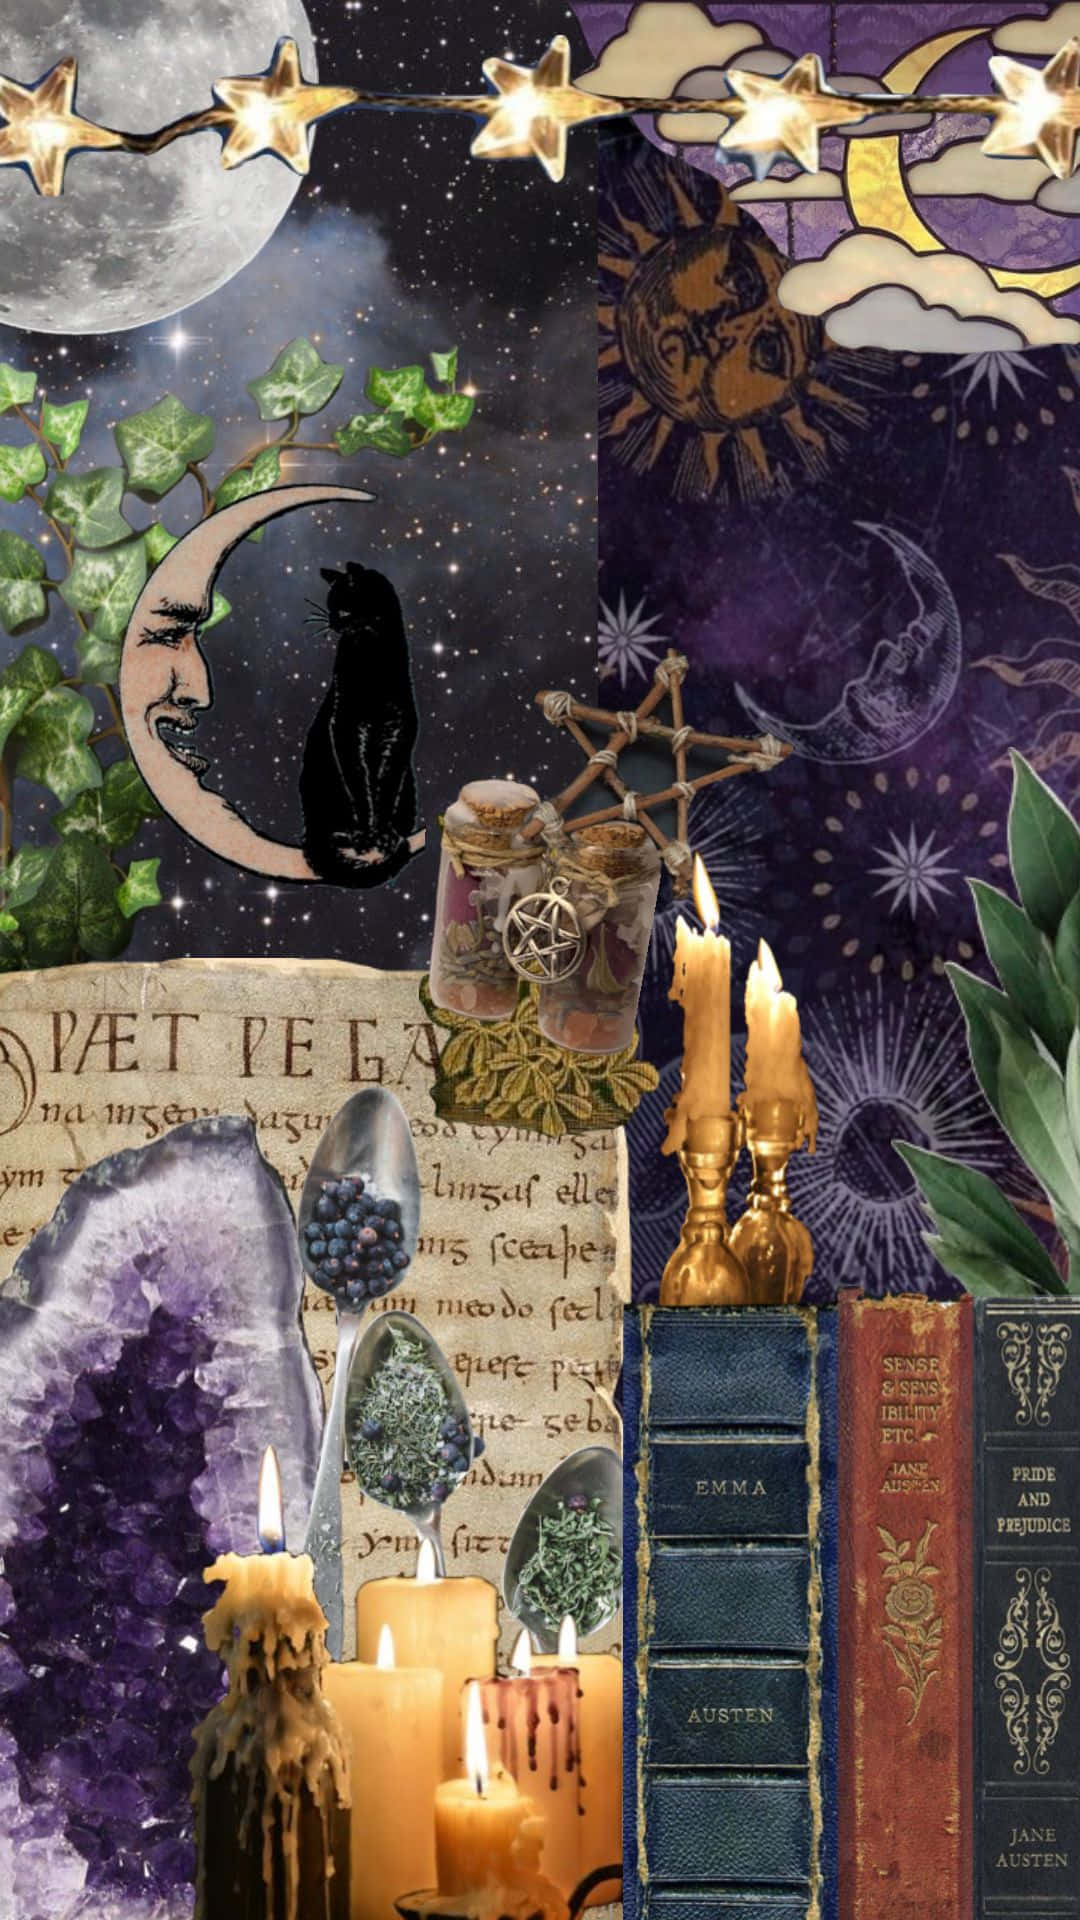 Whimsigoth Aesthetic Collage Wallpaper